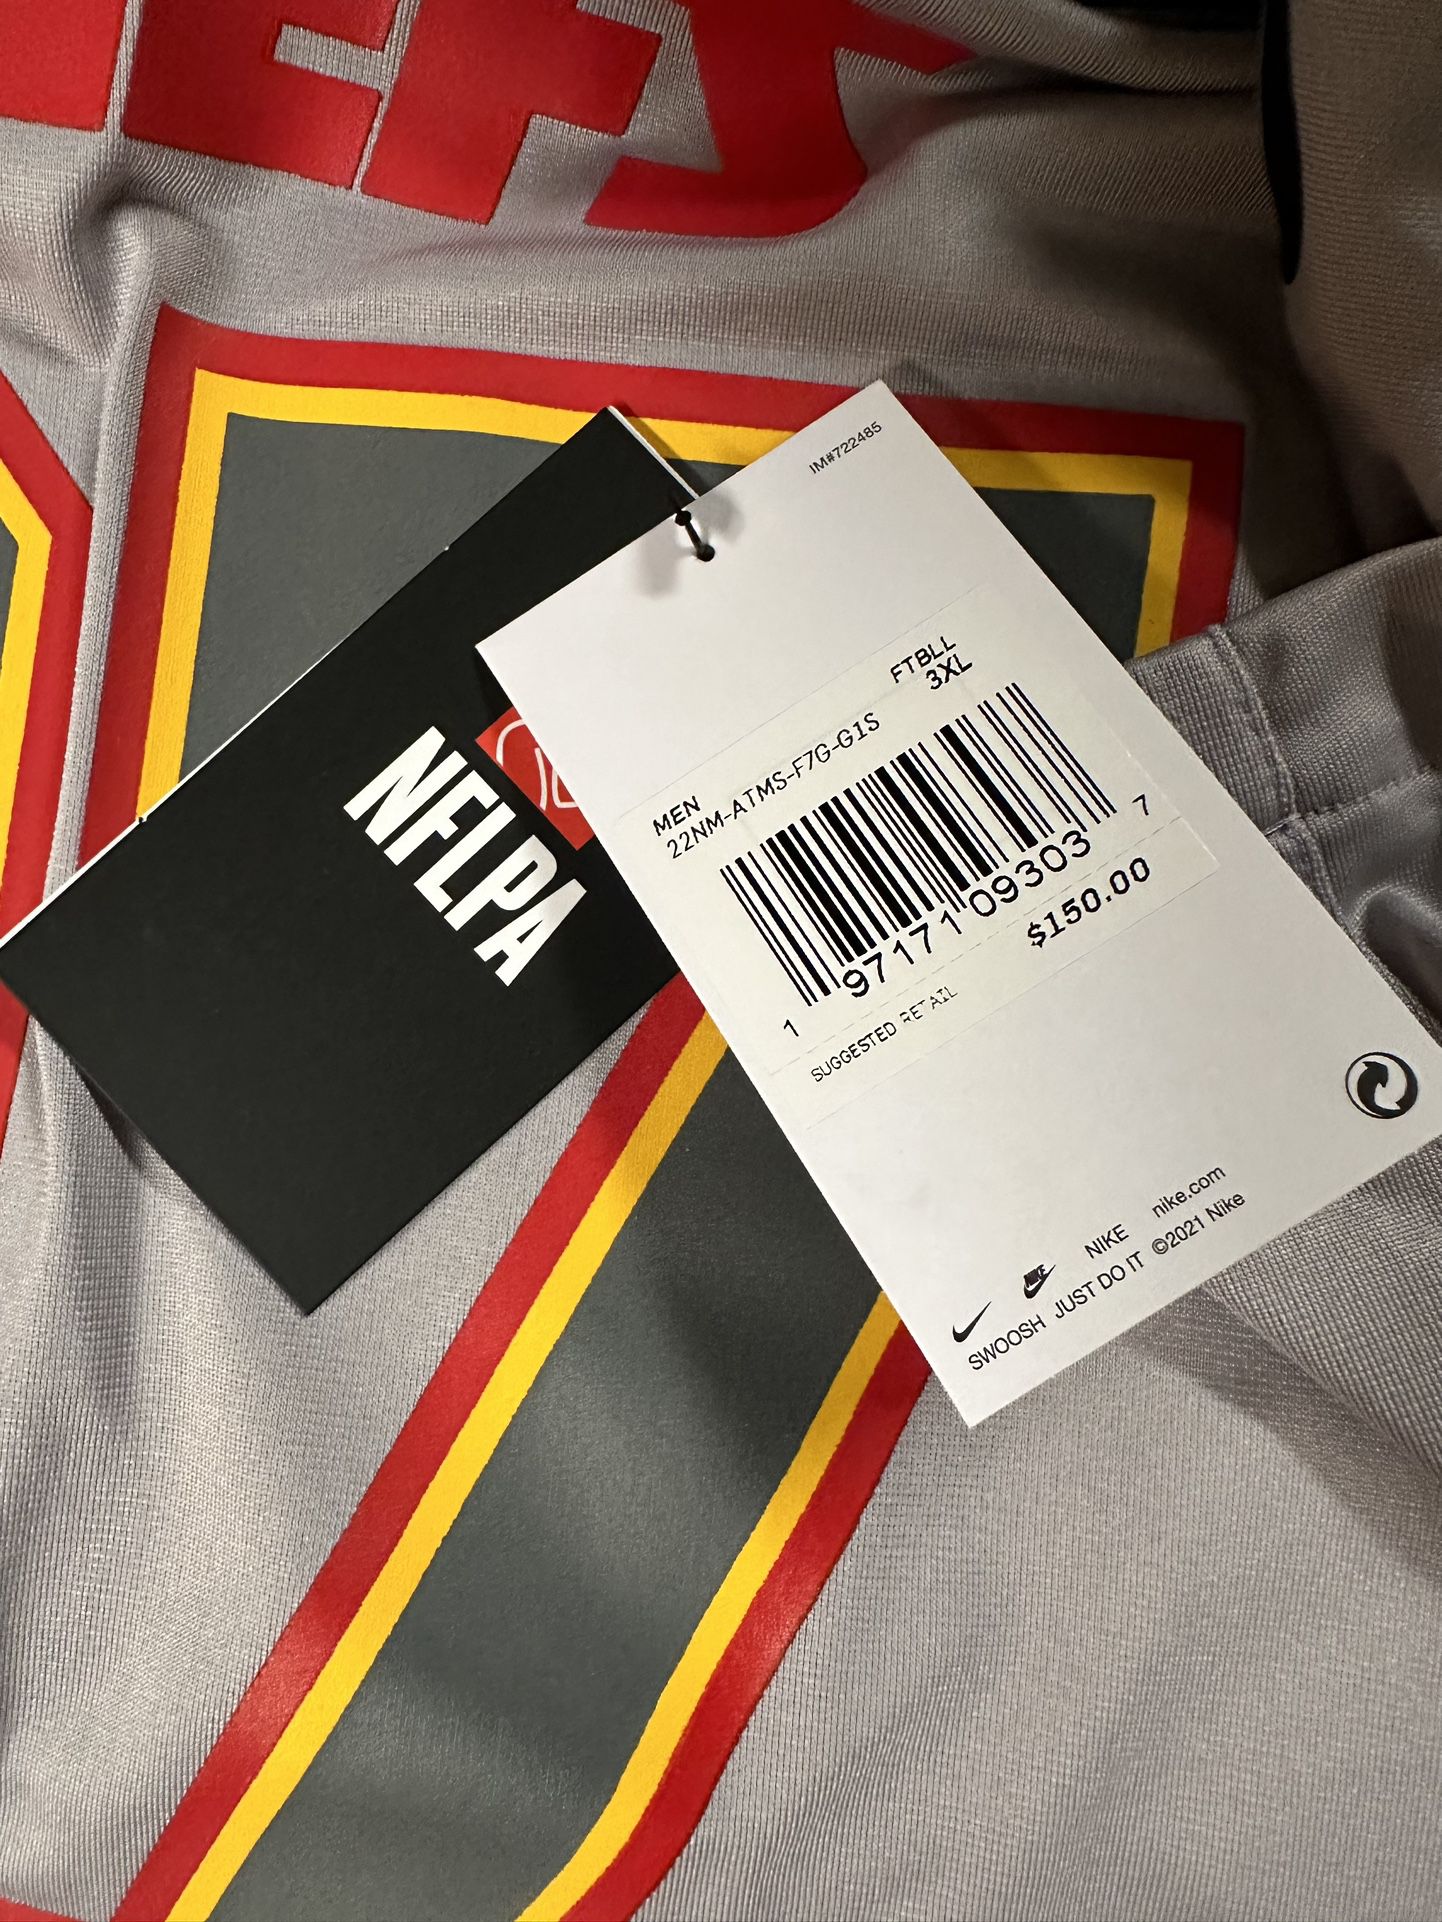 Kansas City Chiefs Travis Kelce NIKE Super Bowl LVII Jersey - 3XL for Sale  in Chicago, IL - OfferUp